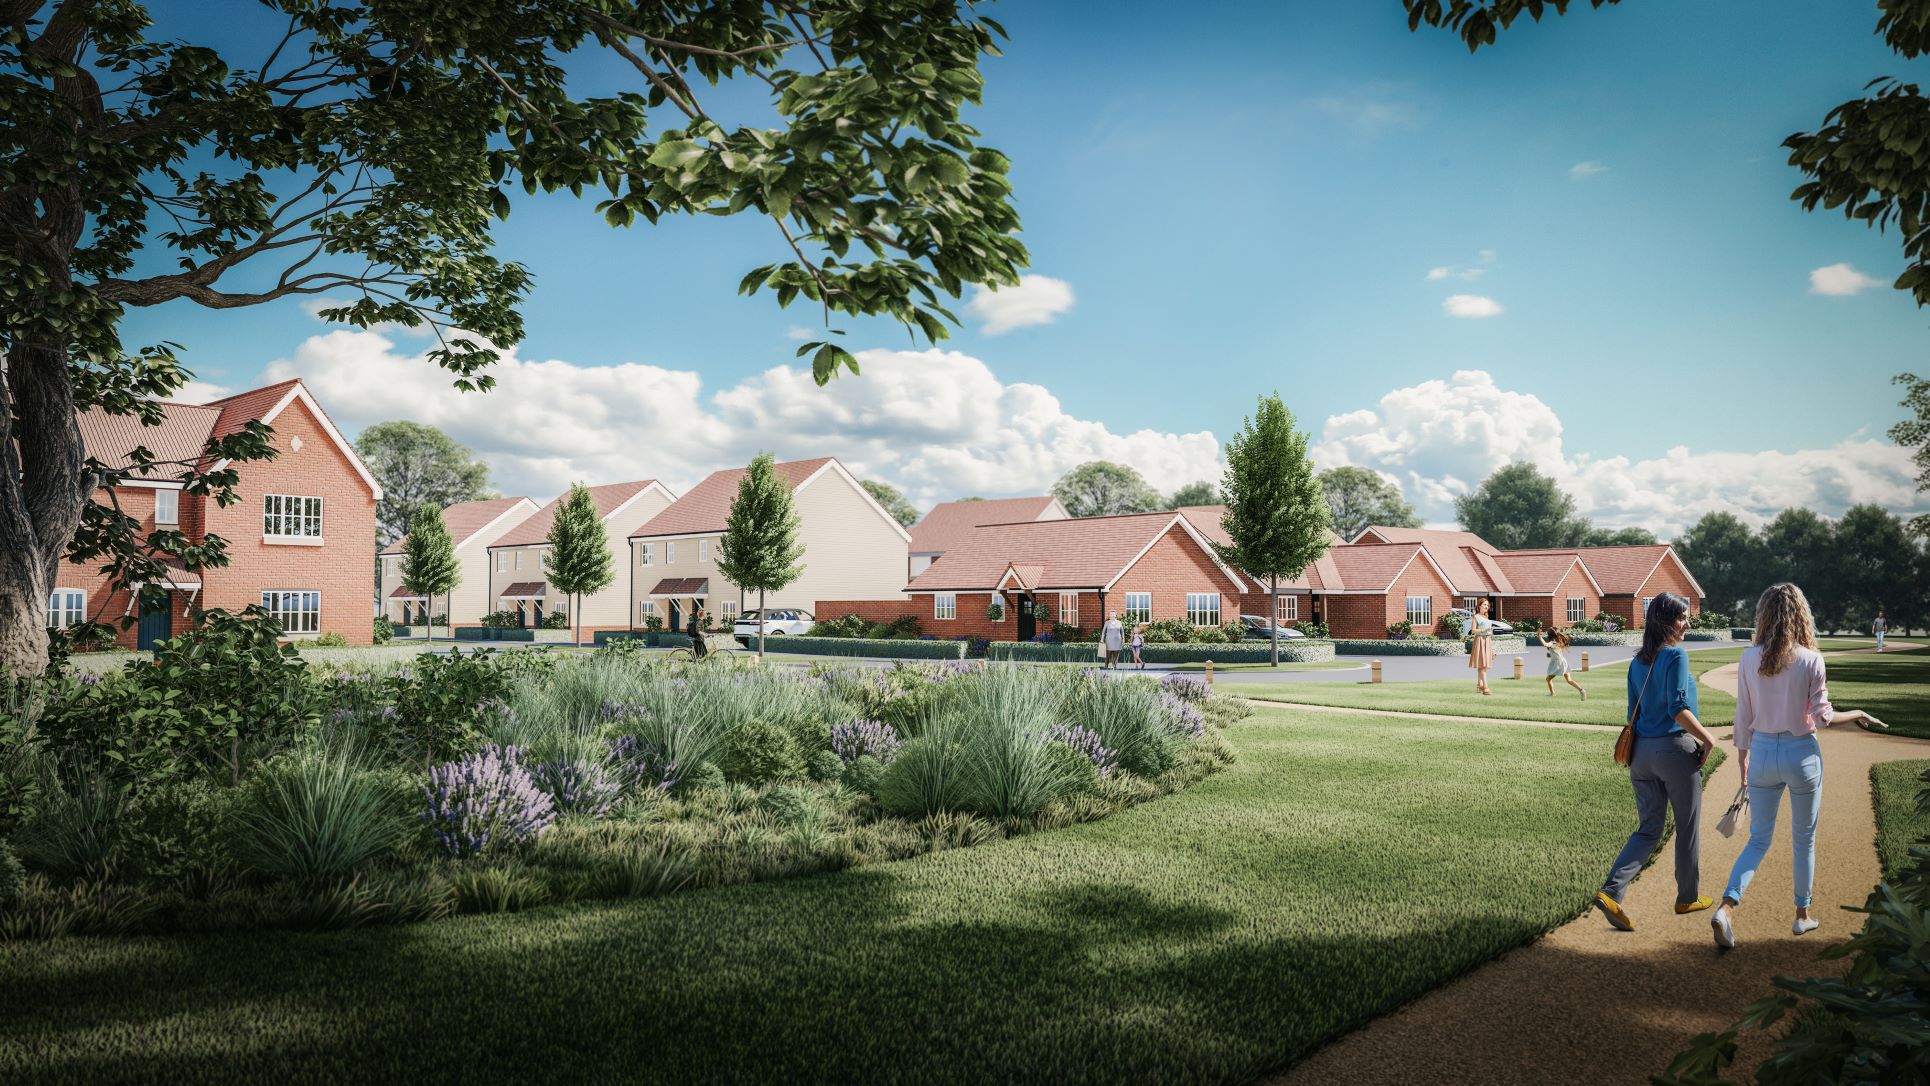 Bellway Provides 335 New Homes in Hatfield Peverel